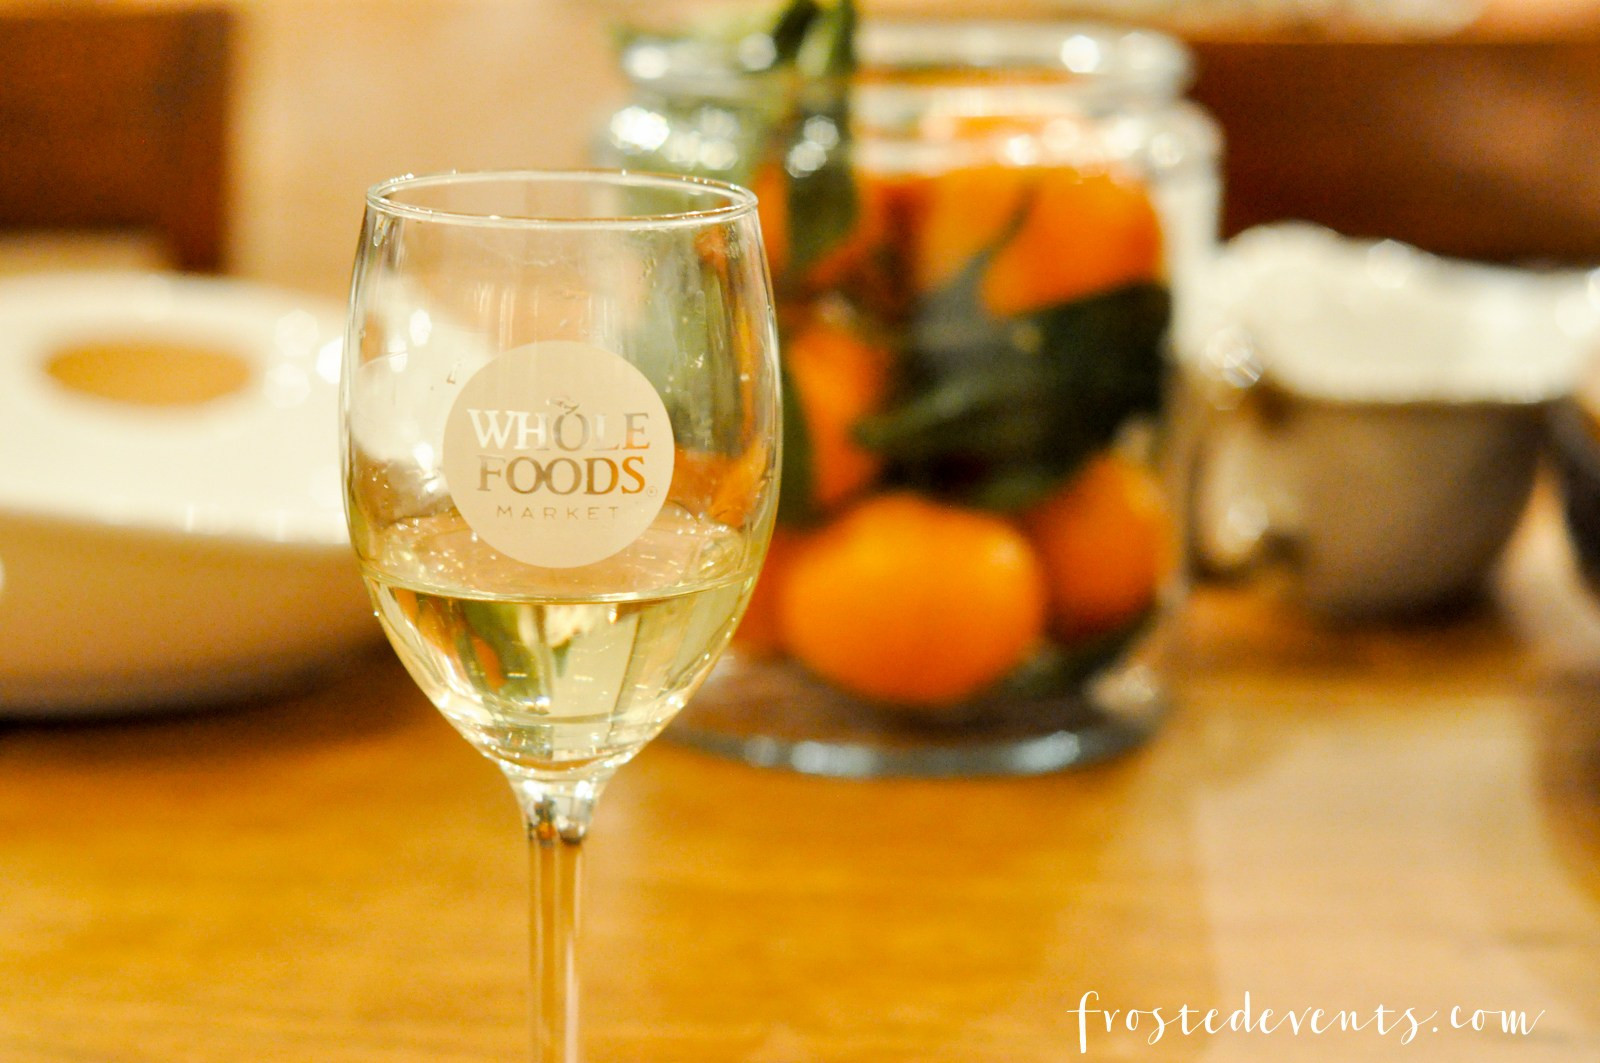 Whole Food Thanksgiving Dinner Order
 thanksgiving dinner whole foods order williams sonoma